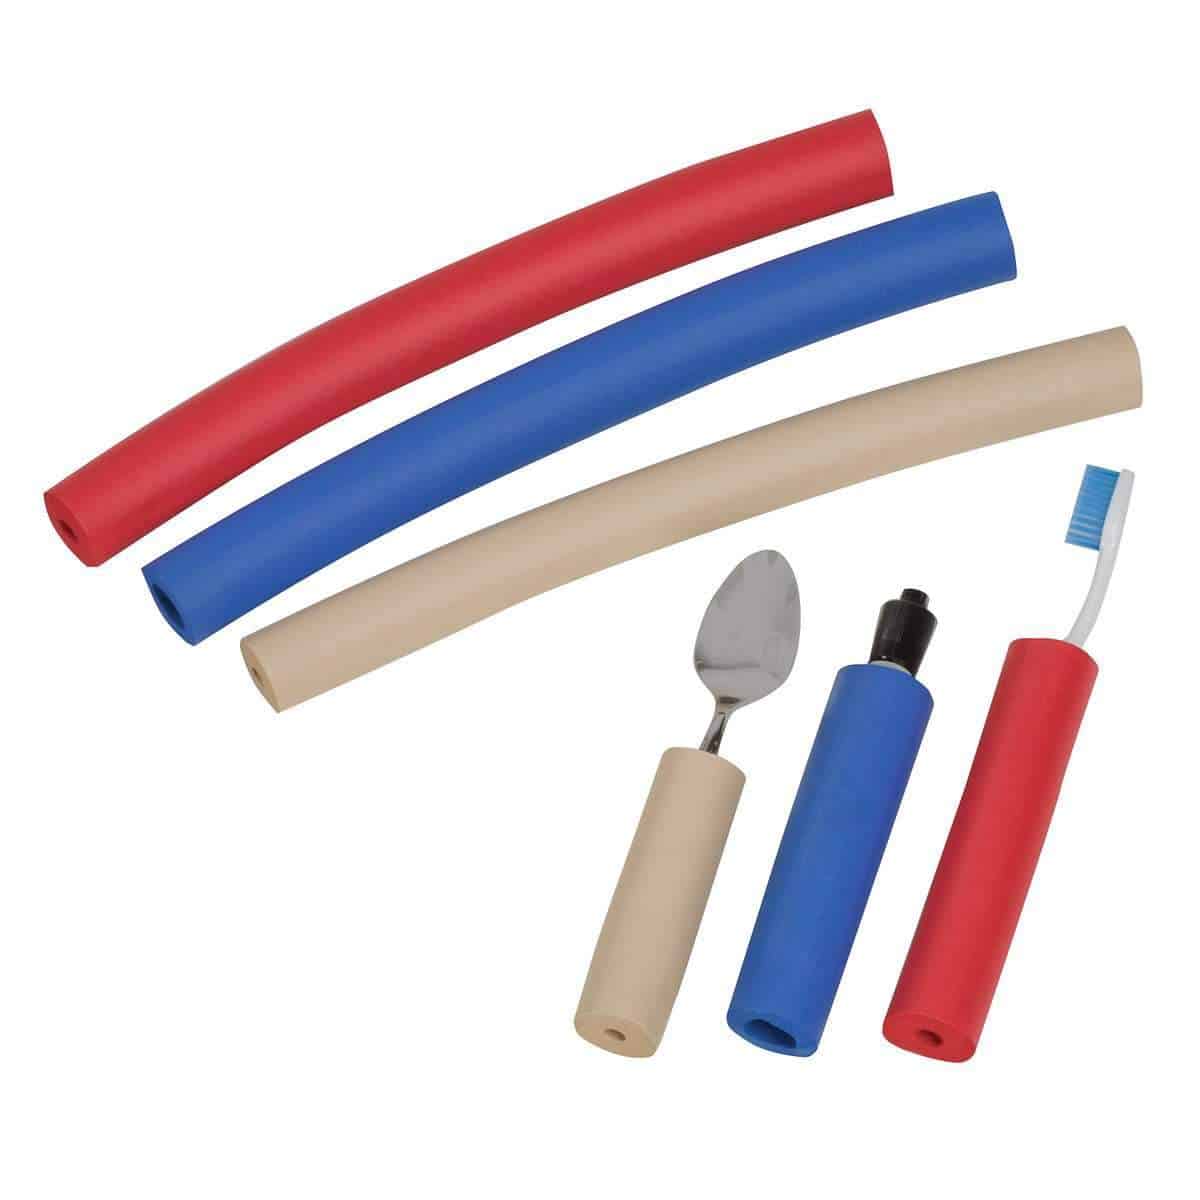 Maddak Handle Grip Foam Tubing - Makes Gripping Smaller Objects Easy - Senior.com Daily Living Aids